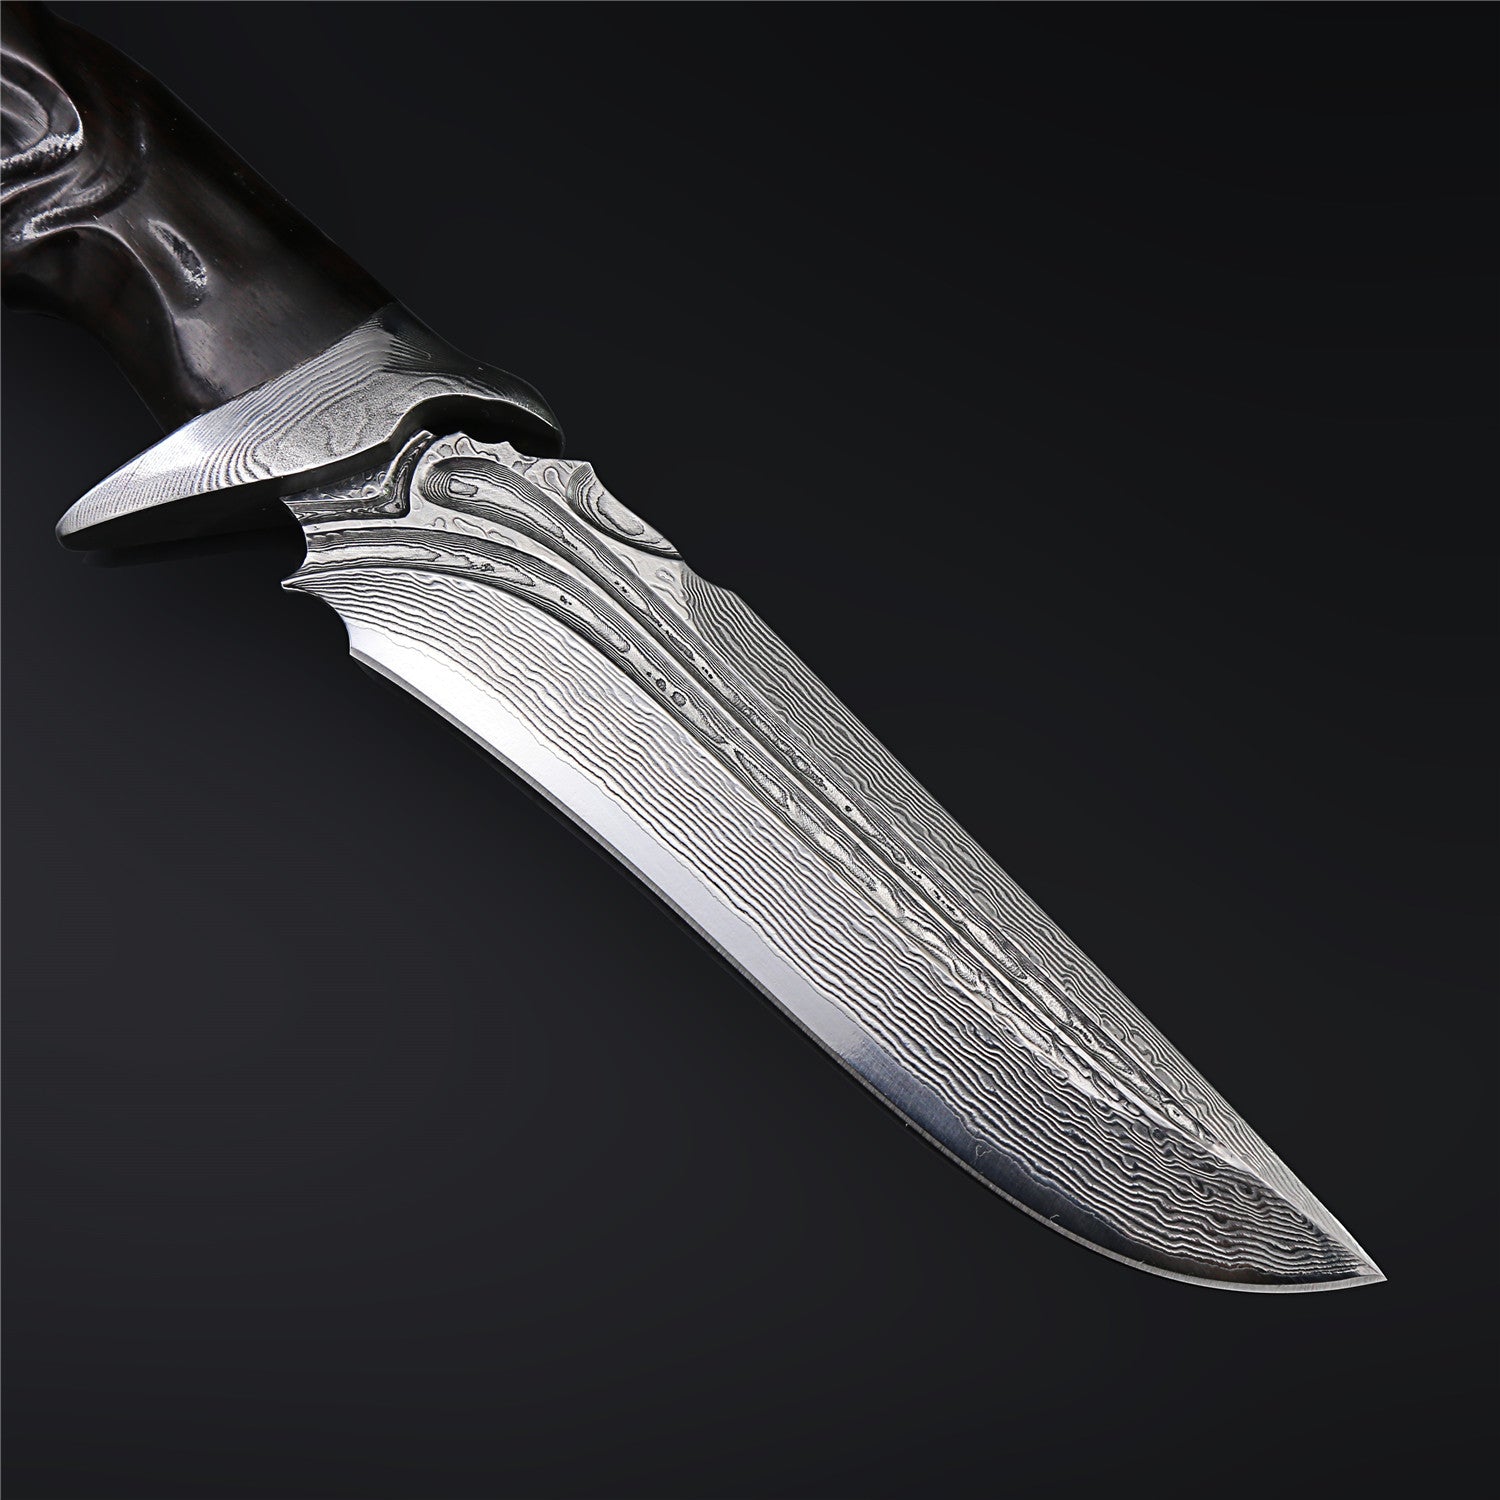 The Zither Damascus Steel Fixed Blade